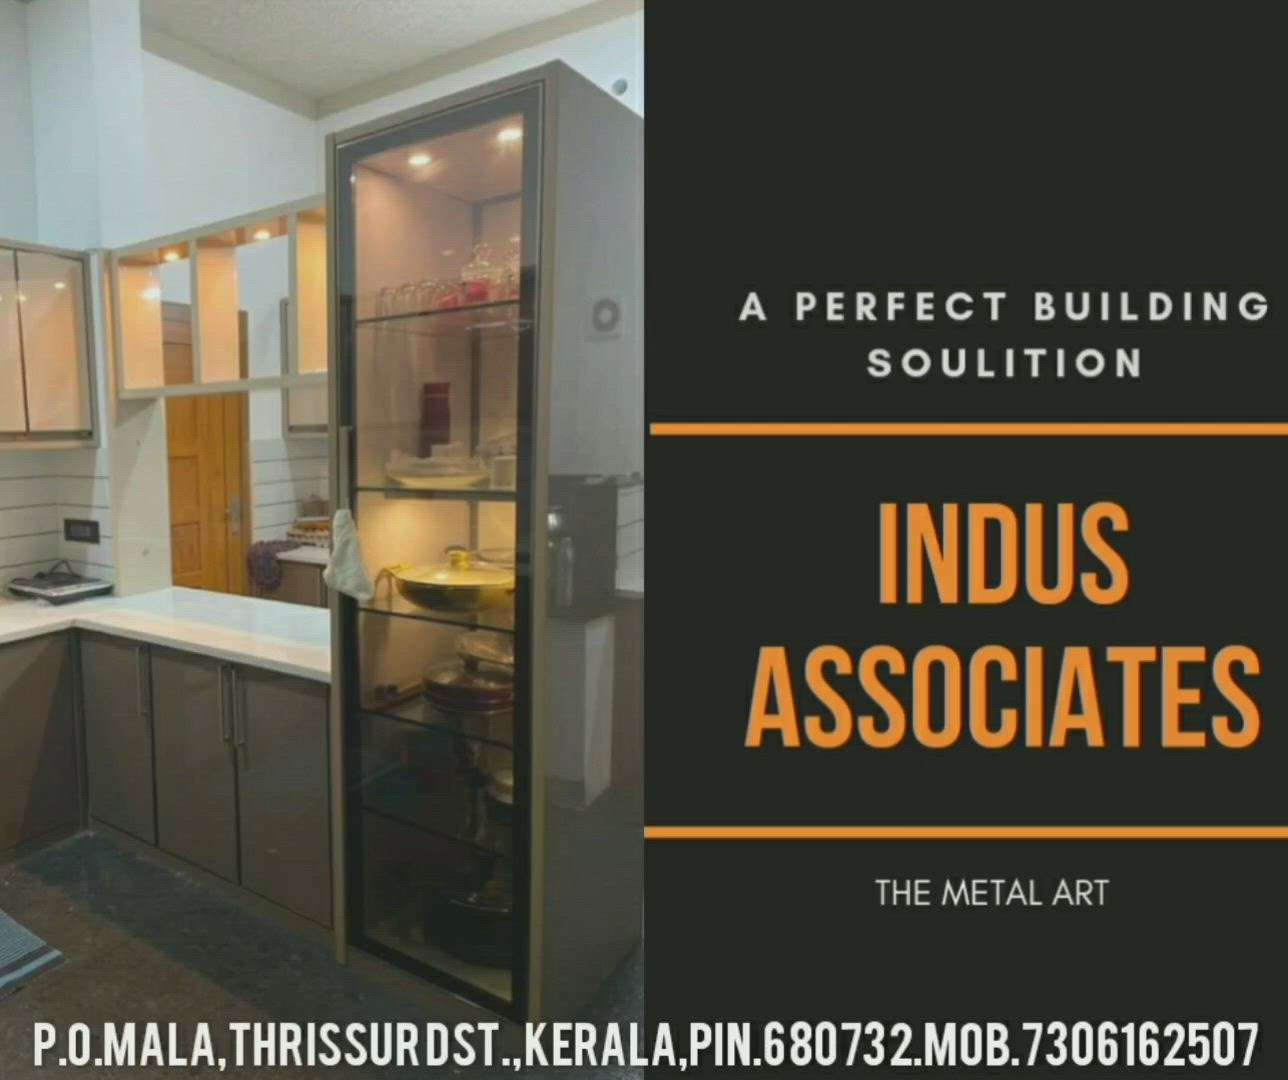 INDUS ASSOCIATES
FOR ALL KINDS OF ALUMINIUM AND GLASS INTERIOR EXTERIOR SOLUTIONS
7306162507